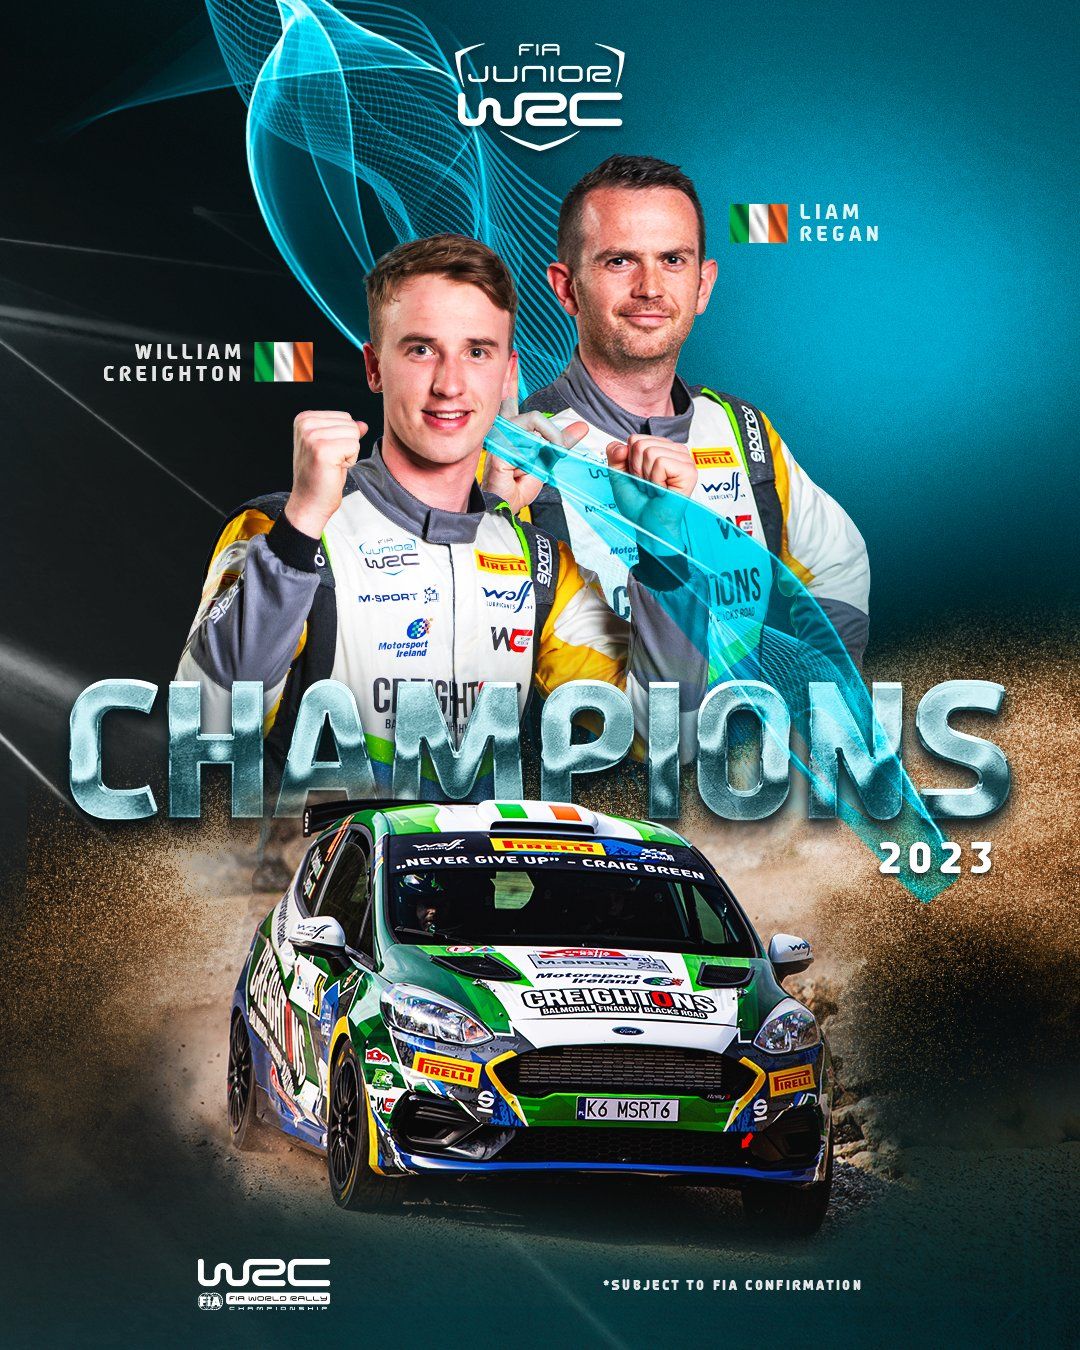 WORLD AT THEIR FEET: William Creighton and Liam Regan claimed the Junior WRC title in Greece